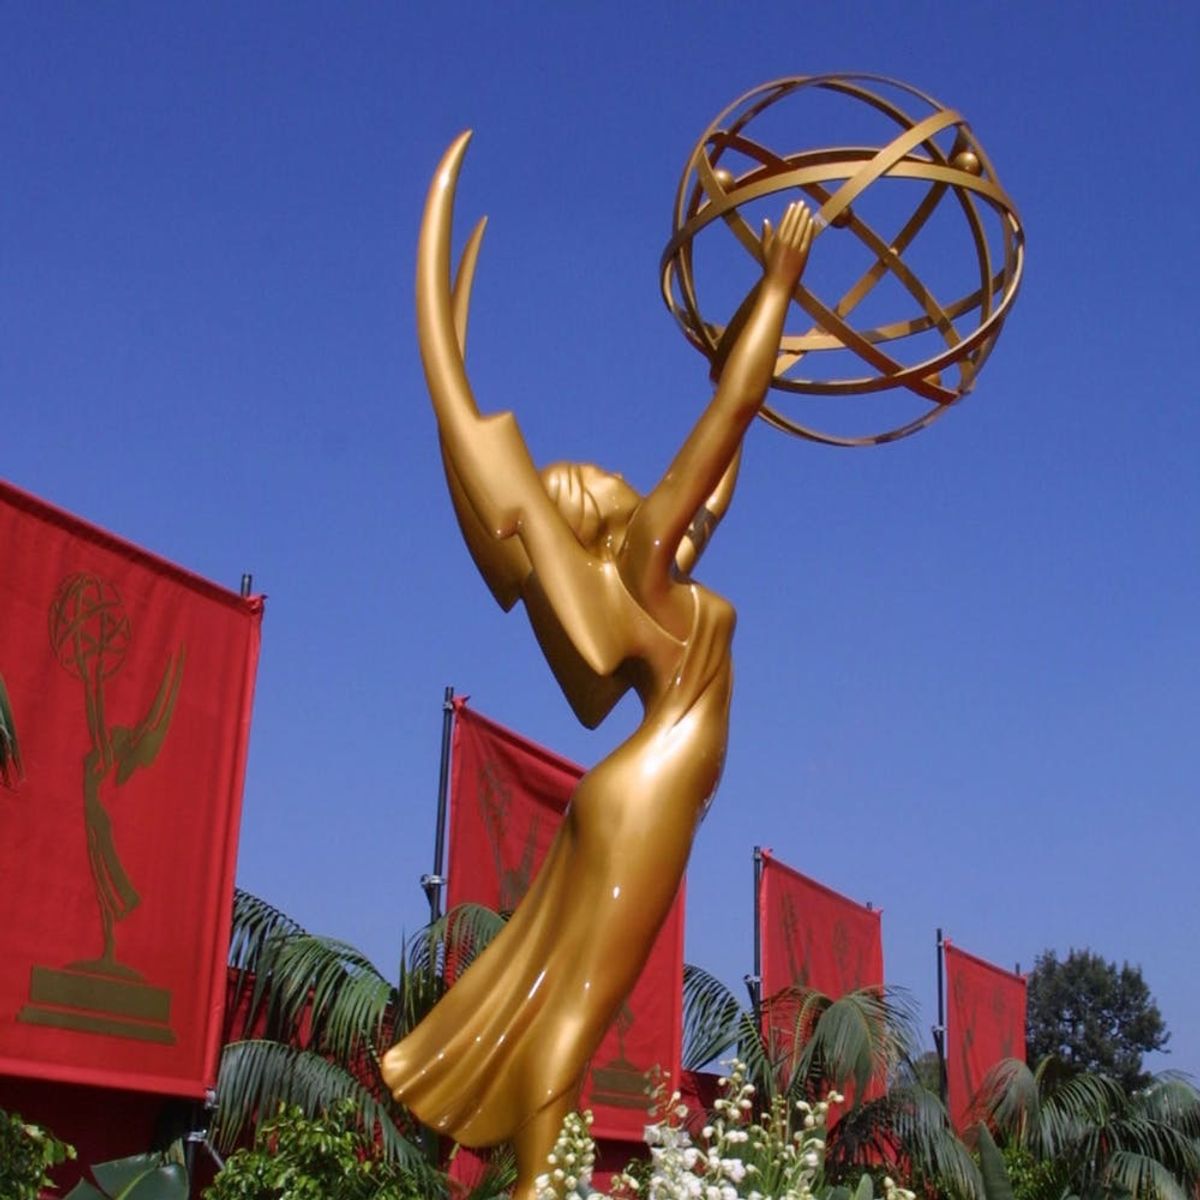 Everything You Need to Know About the 2017 Primetime Emmy Awards